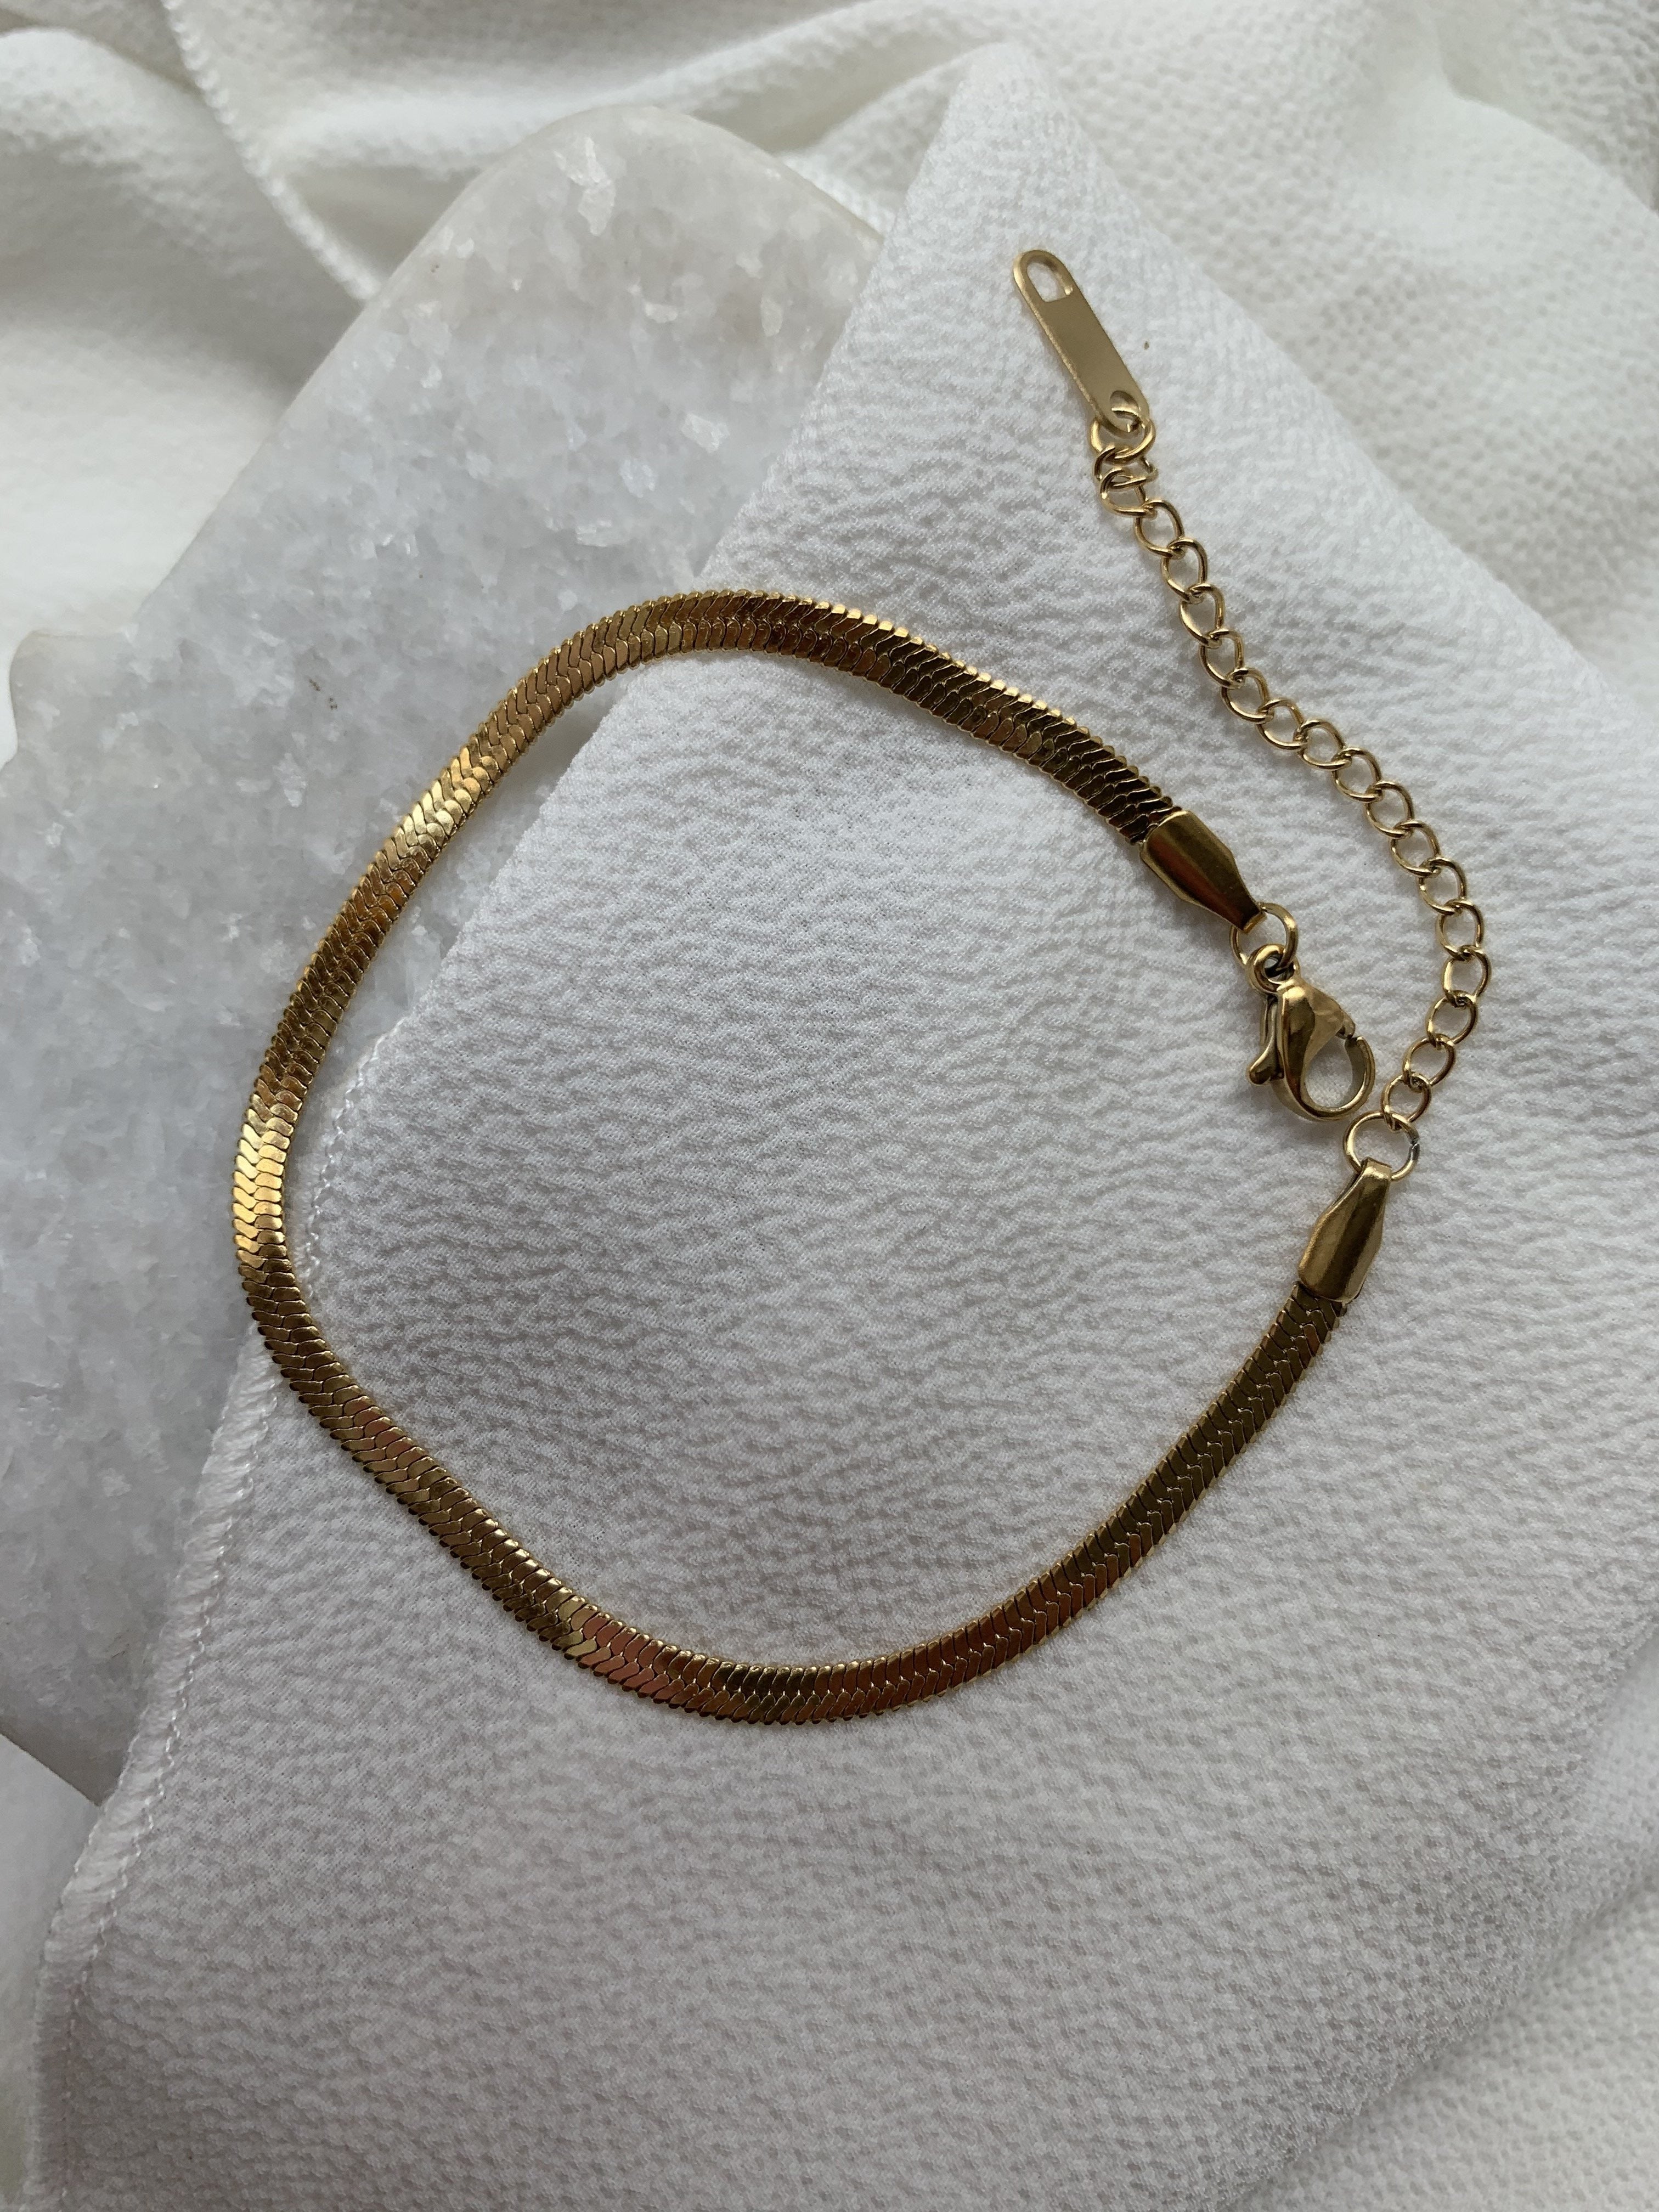 Chic and simple, it should already be on your wrist! gold plated stainless steel water resistant tarnish free 18 cm length, 3mm width adjustable heart extender attached | Easy Snake Bracelet | Non-tarnish 14k Jewellery EasyClubCo